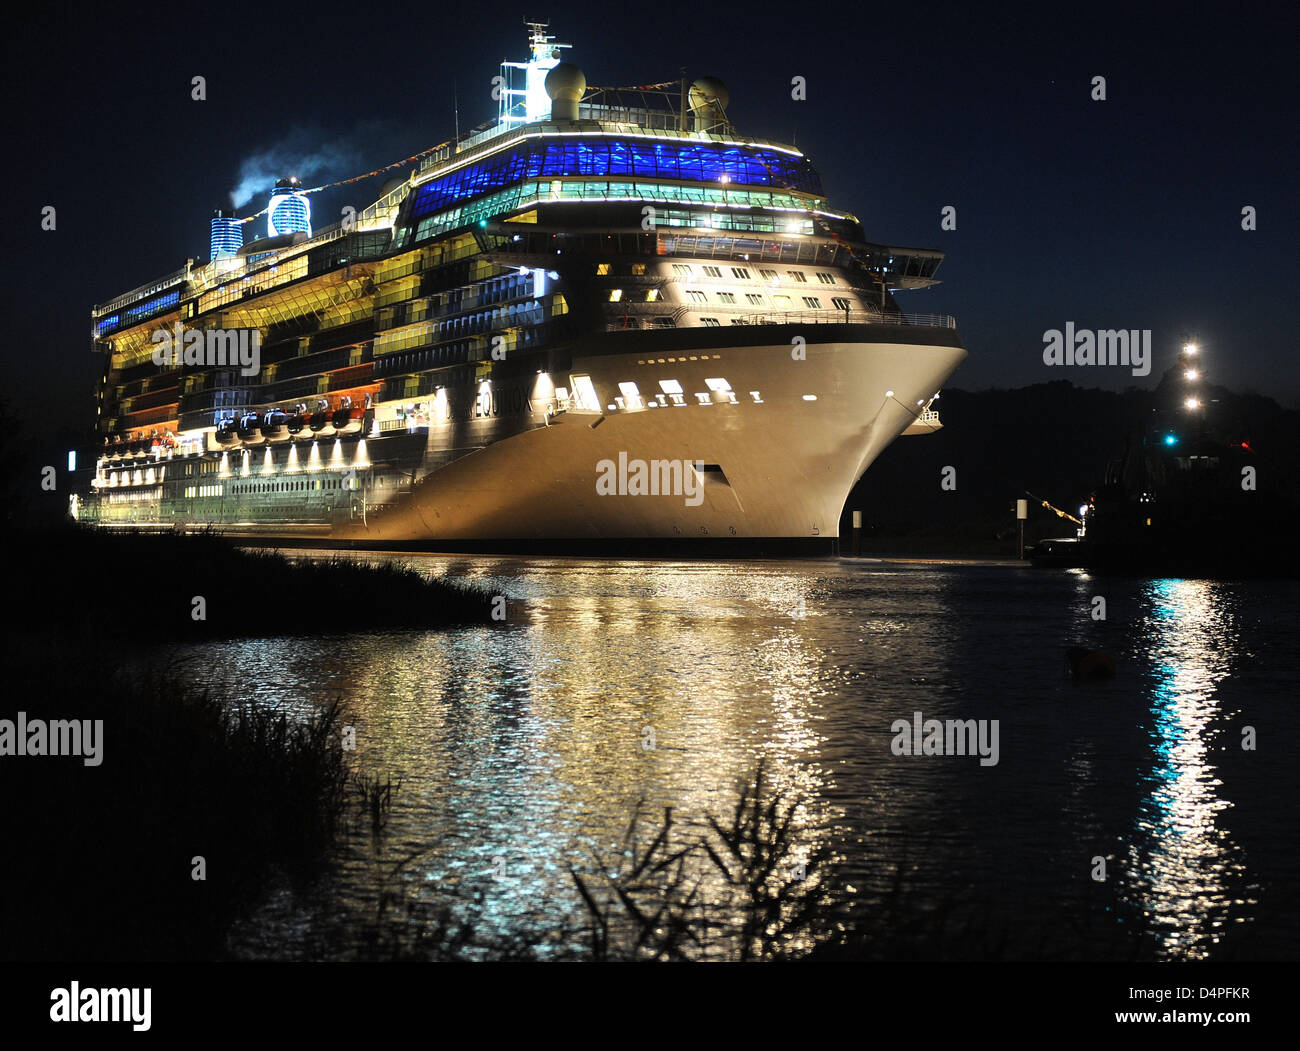 The 317-metres long cruise liner ?Equinox? by US shipowning company Celebrity Cruises passes Ems river on her war to the North Sea in Weener, Germany, 20 June 2009. Photo: Ingo  Wagner Stock Photo